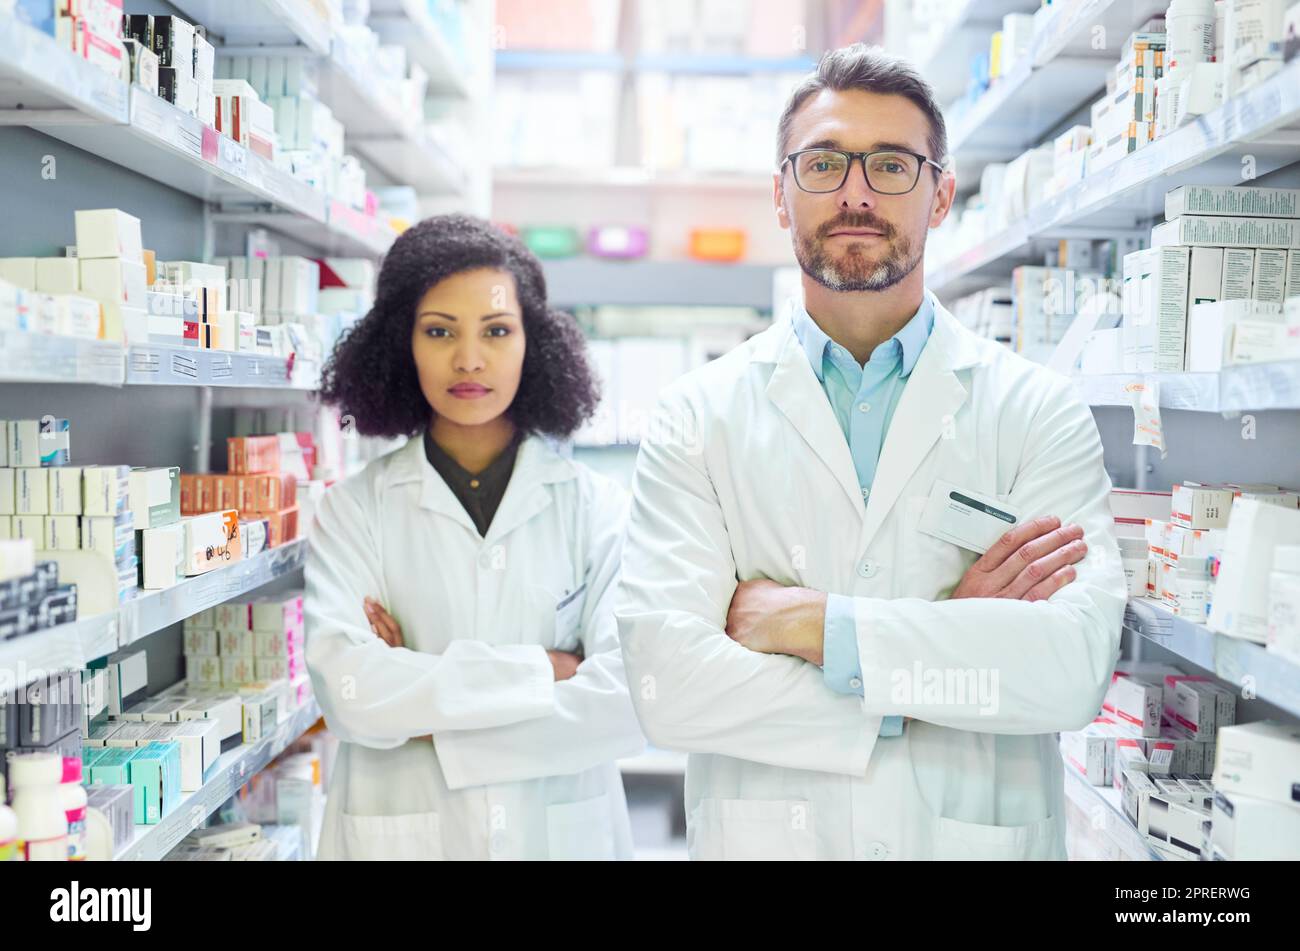 Keeping you well is what we do. Portrait of a confident mature man and young woman working together in a pharmacy. Stock Photo